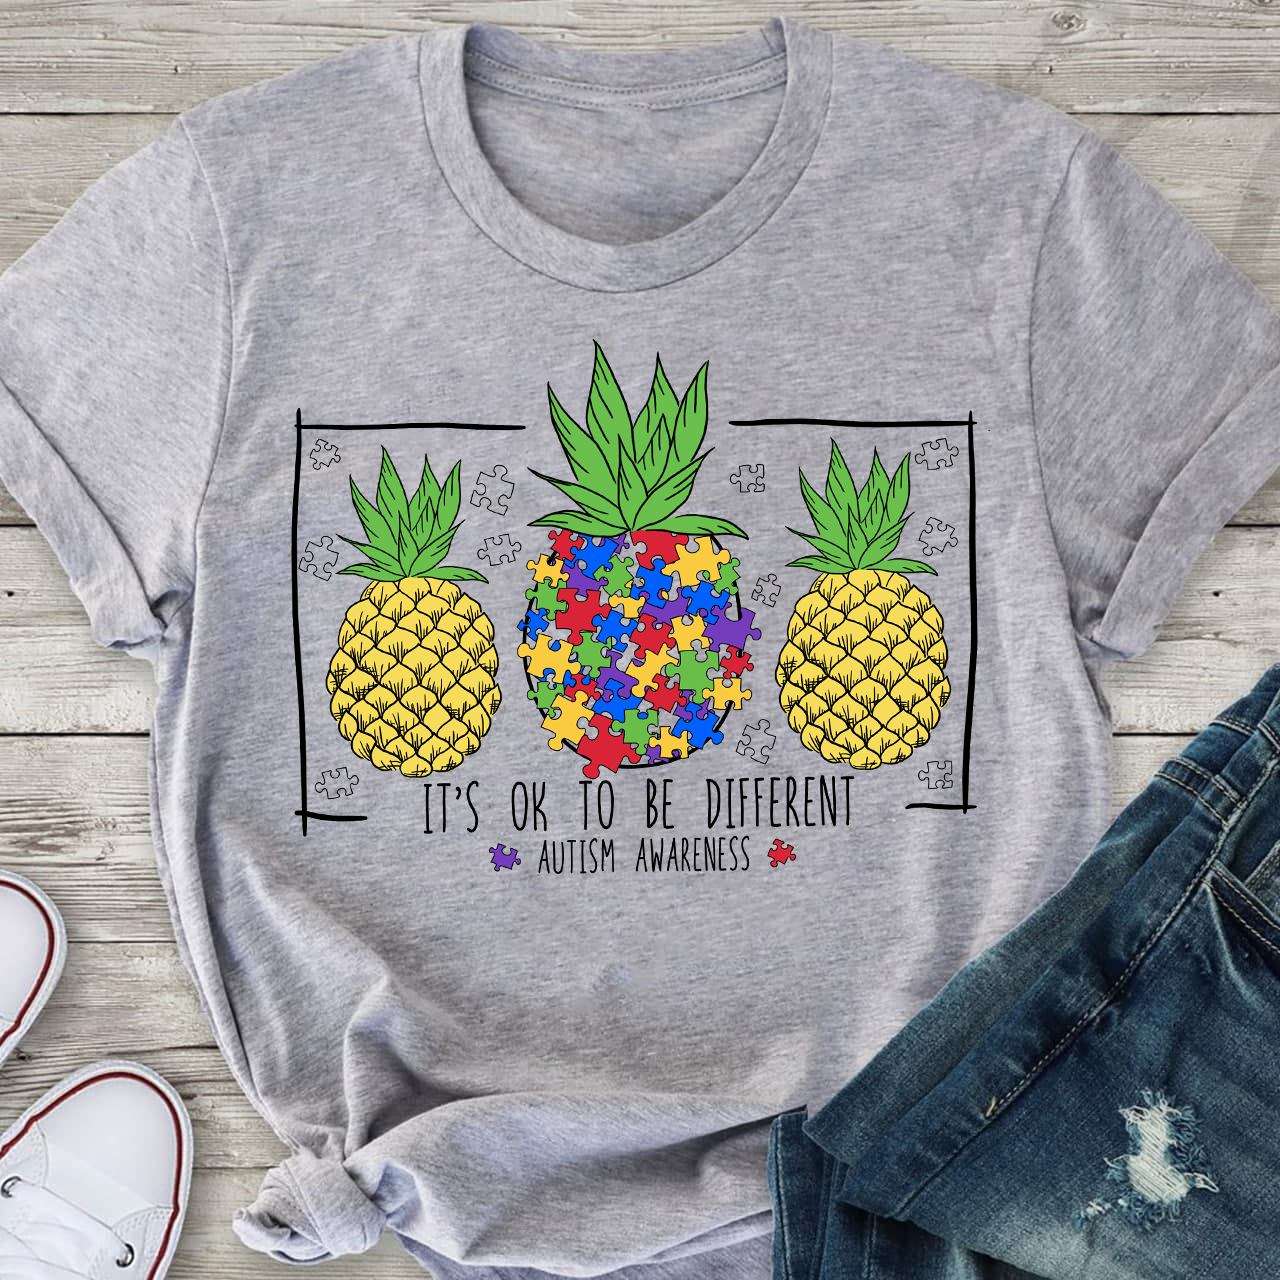 It's ok to be different - Autism awareness, different pineapple